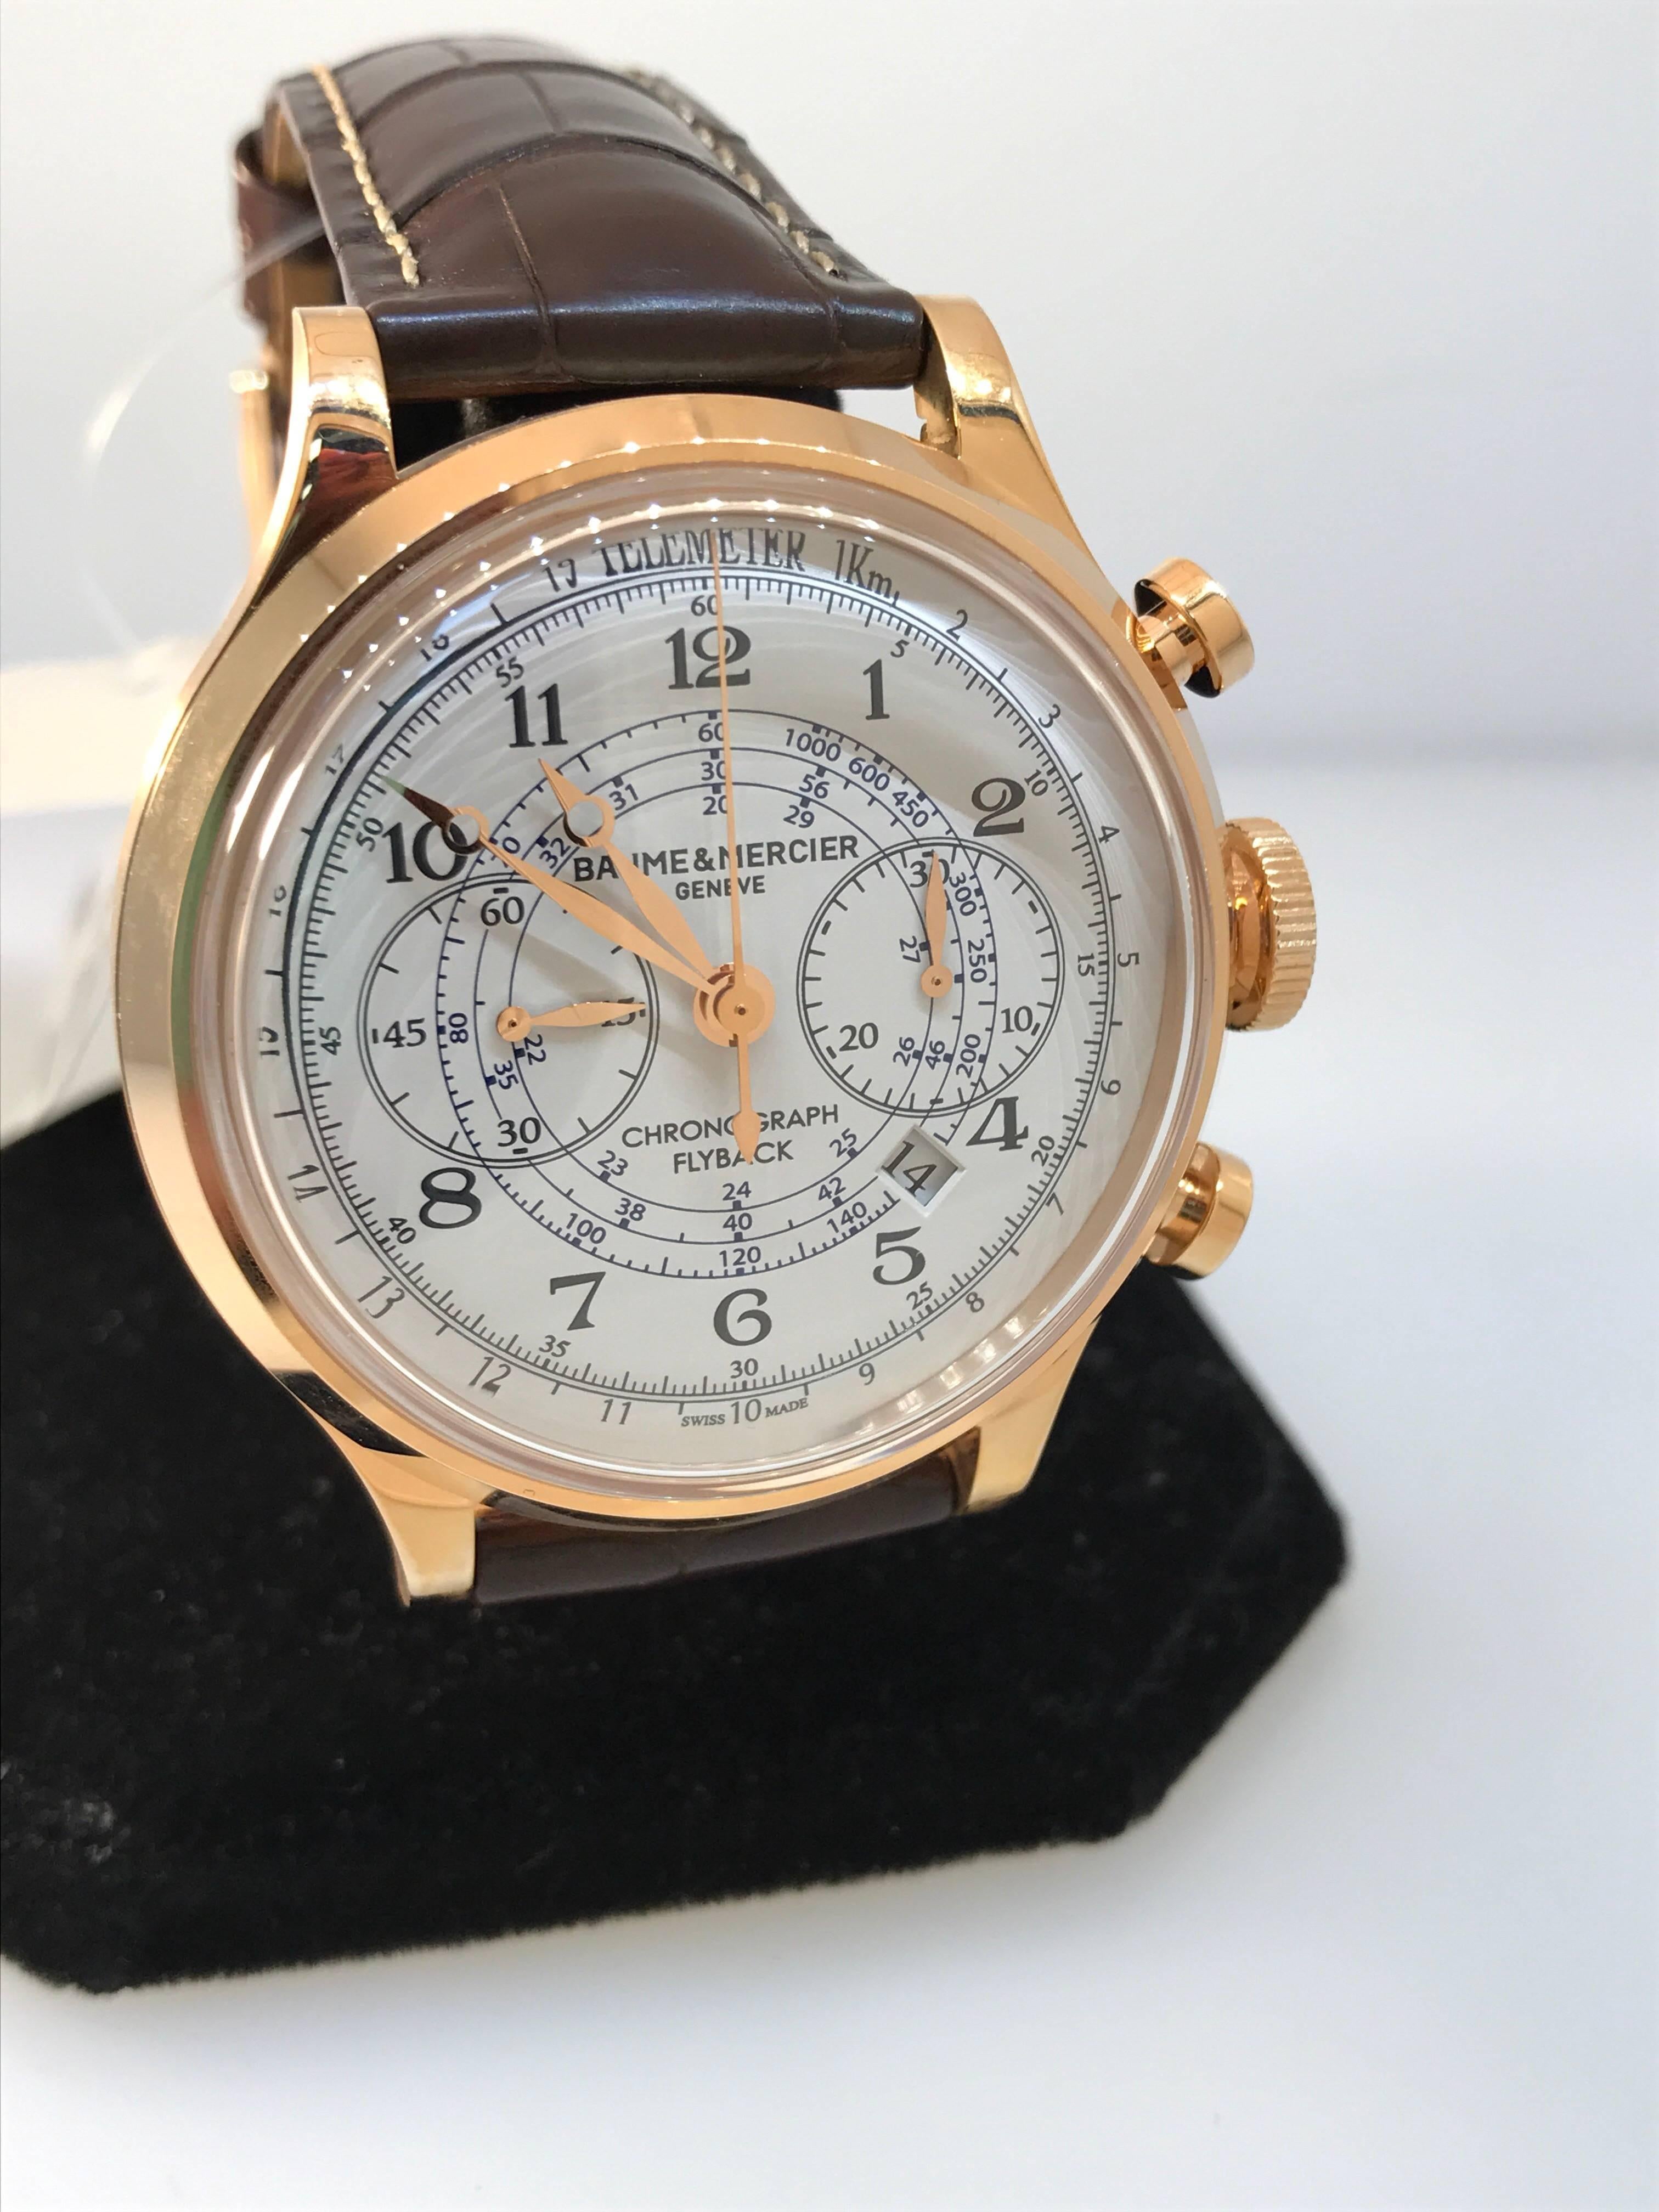 Baume and Mercier Capeland Men's watch

Model number M0A10007

Brand New

Comes complete with original Baume and Mercier box, warranty card, and instruction manual

18 karat rose gold case and buckle

White dial and subdials

Arabic numeral hour